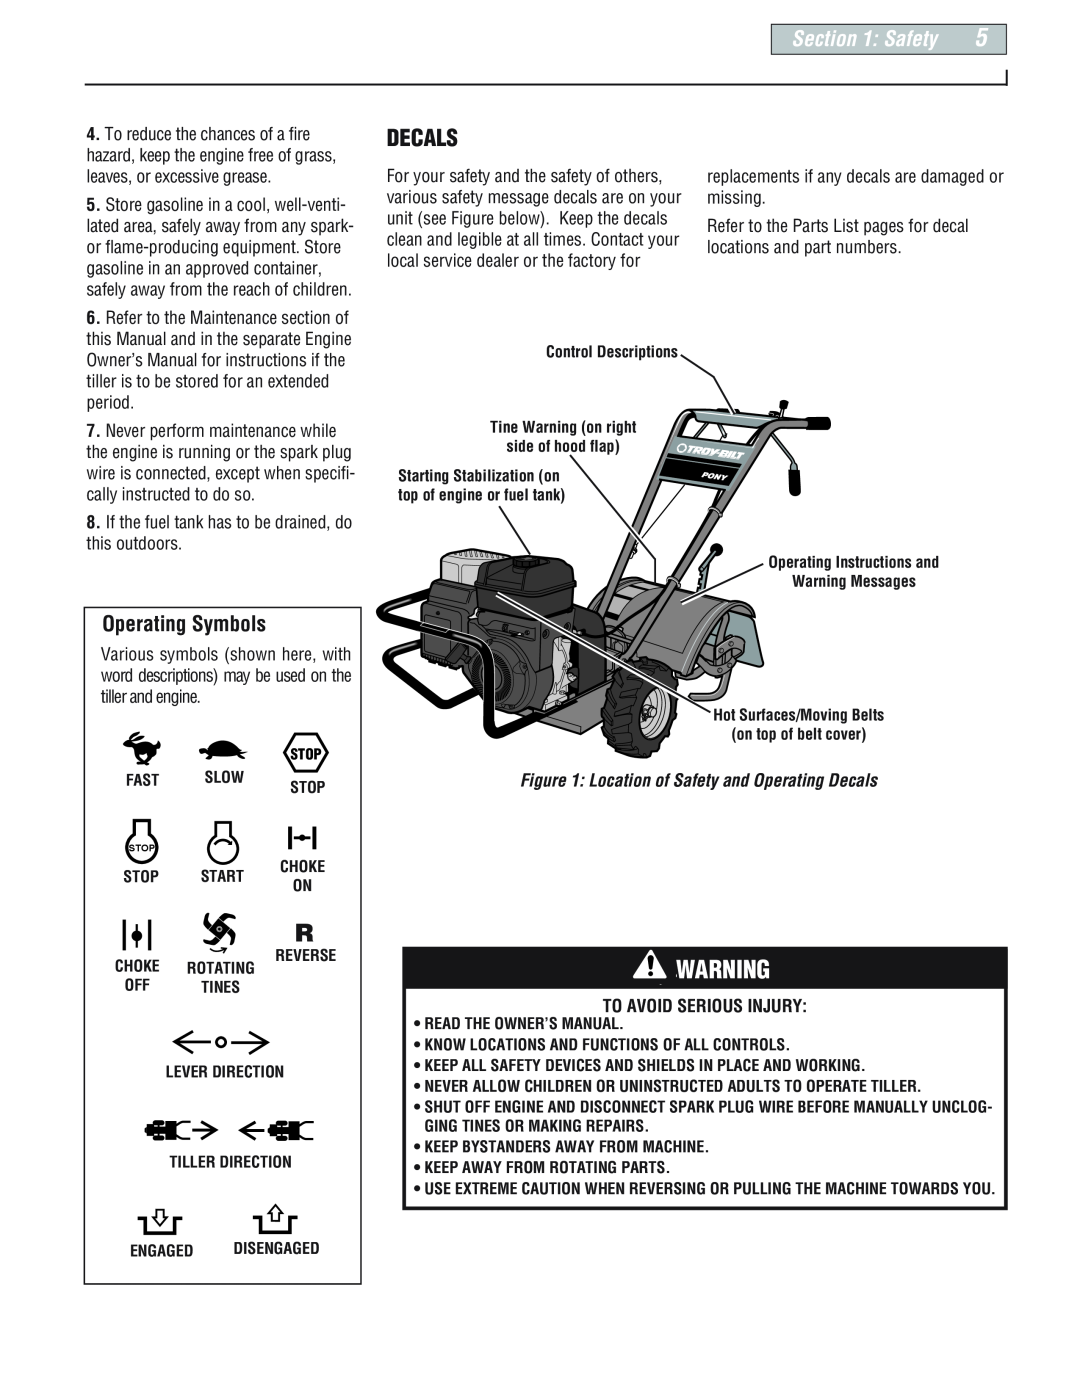 Troy-Bilt E66M PonyES manual Operating Symbols, Location of Safety and Operating Decals, To Avoid Serious Injury 